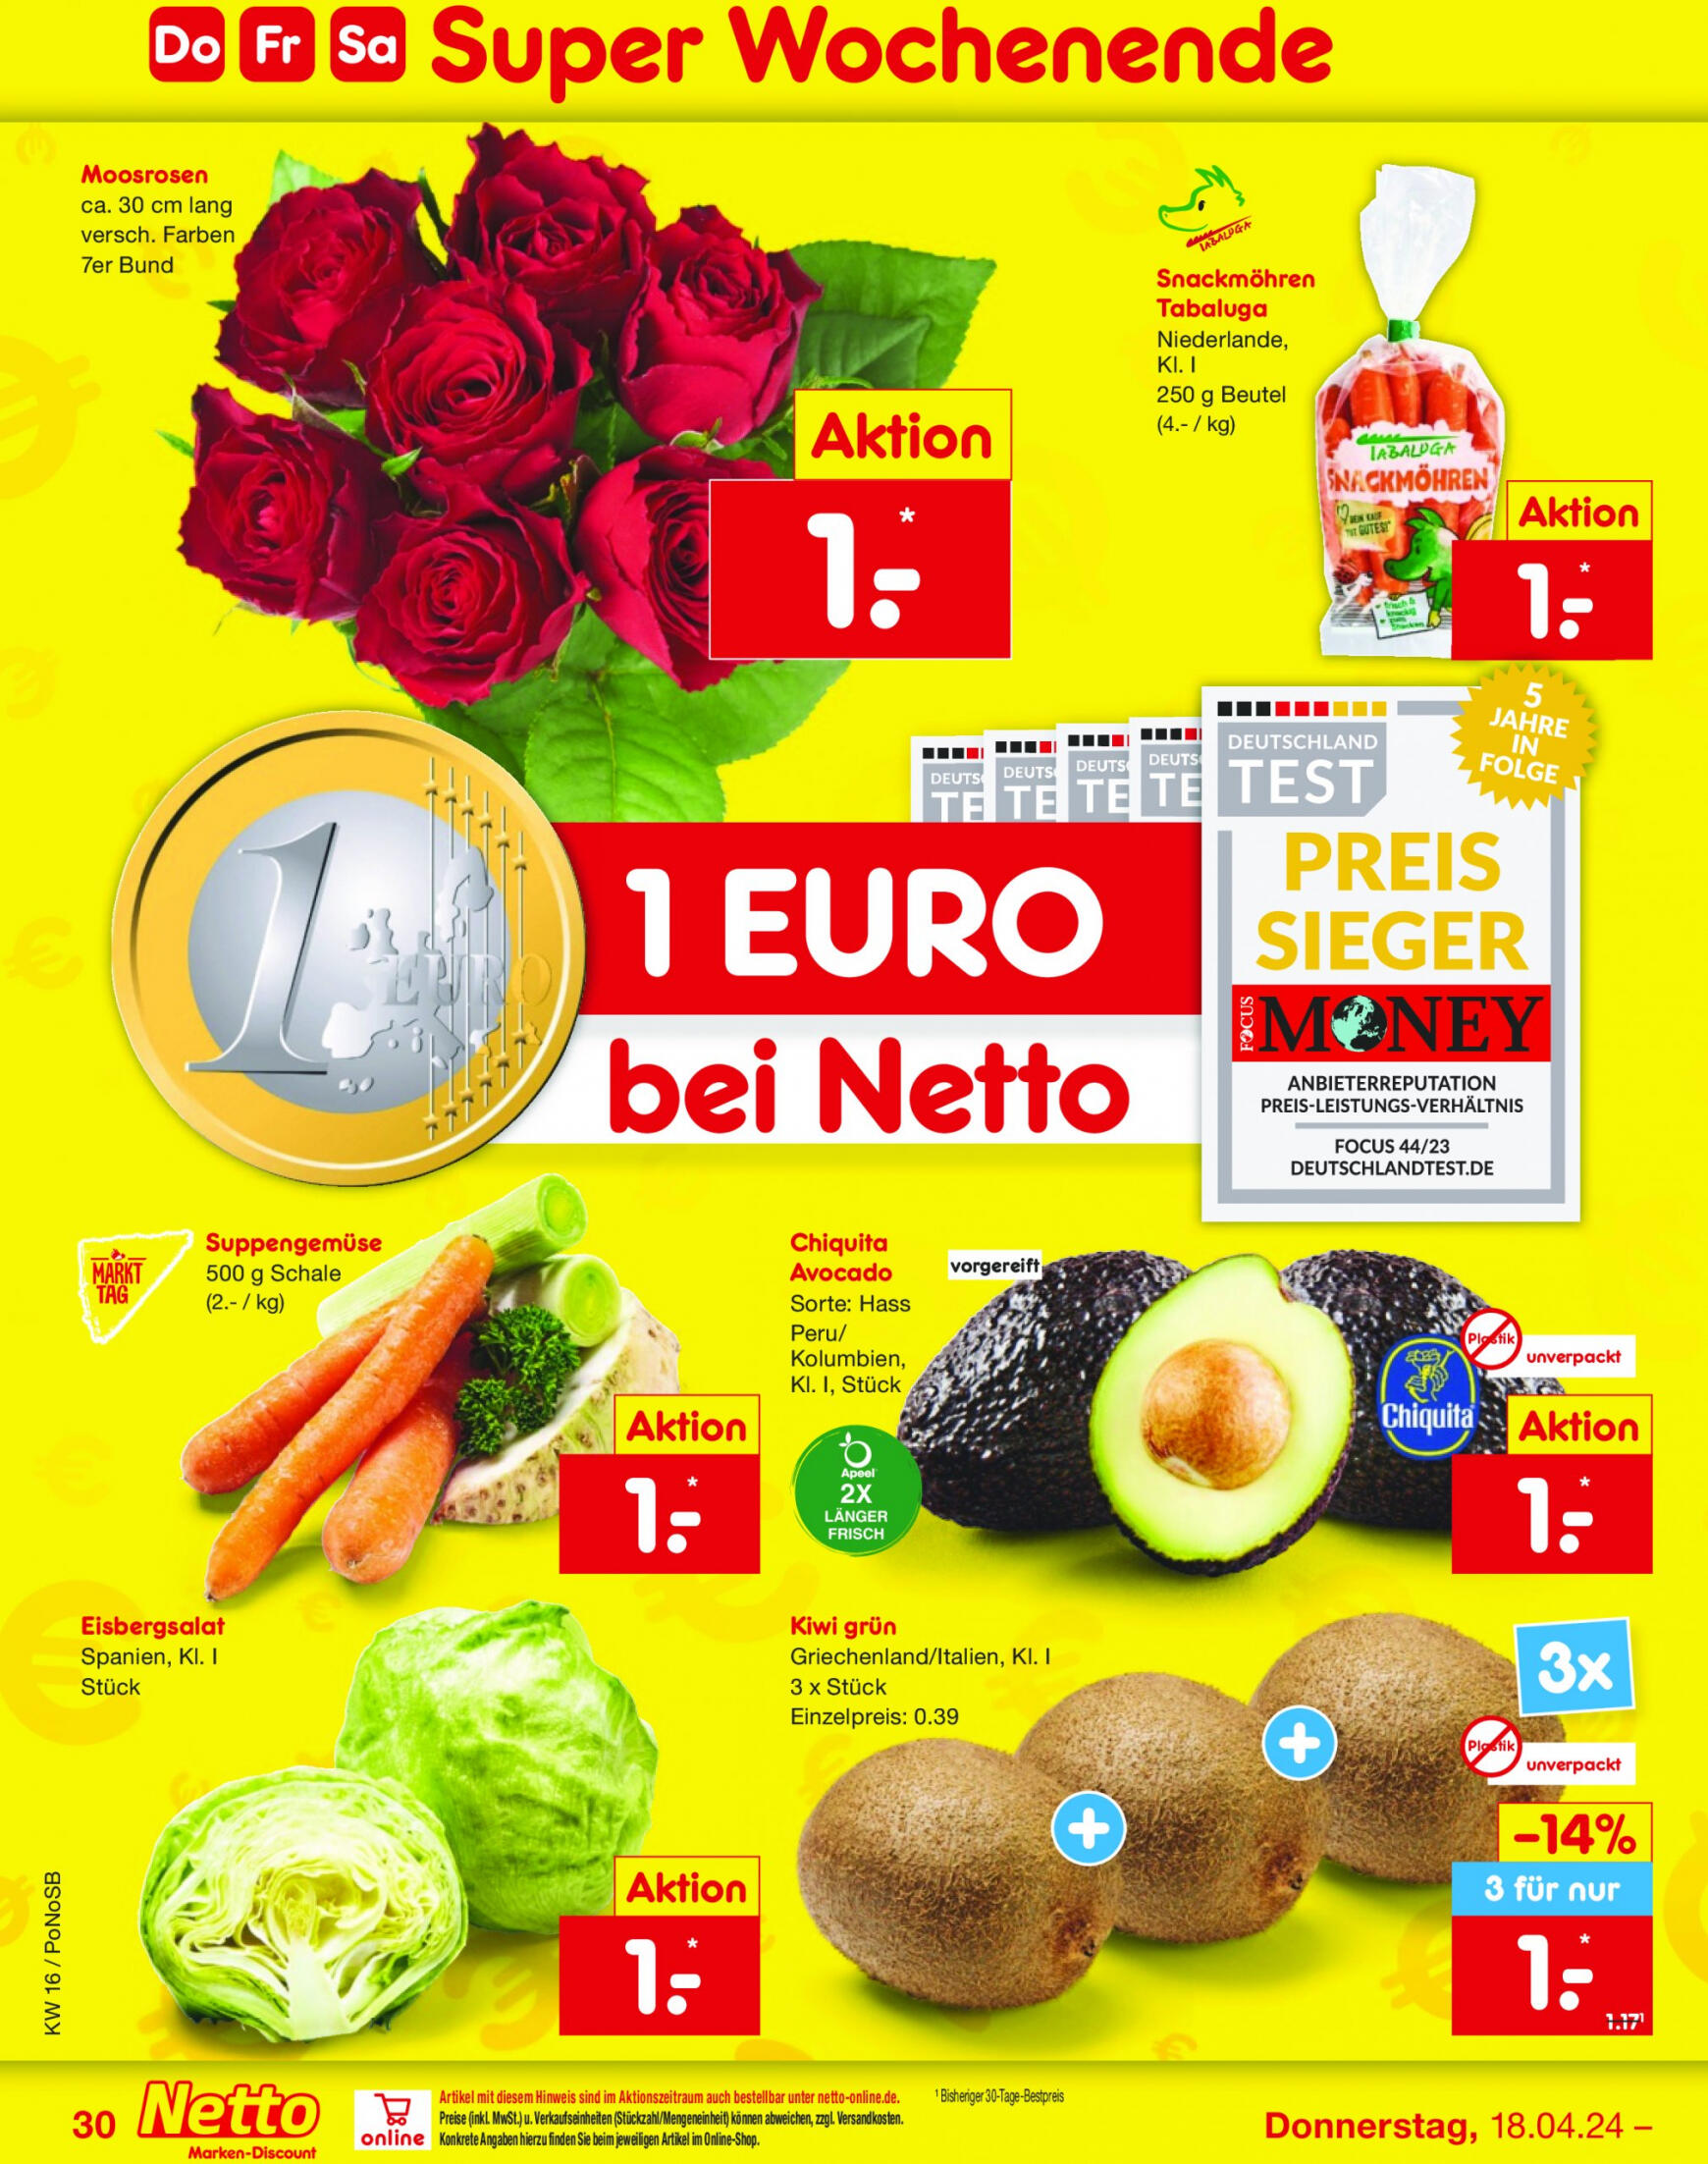 netto - Flyer Netto aktuell 15.04. - 20.04. - page: 36